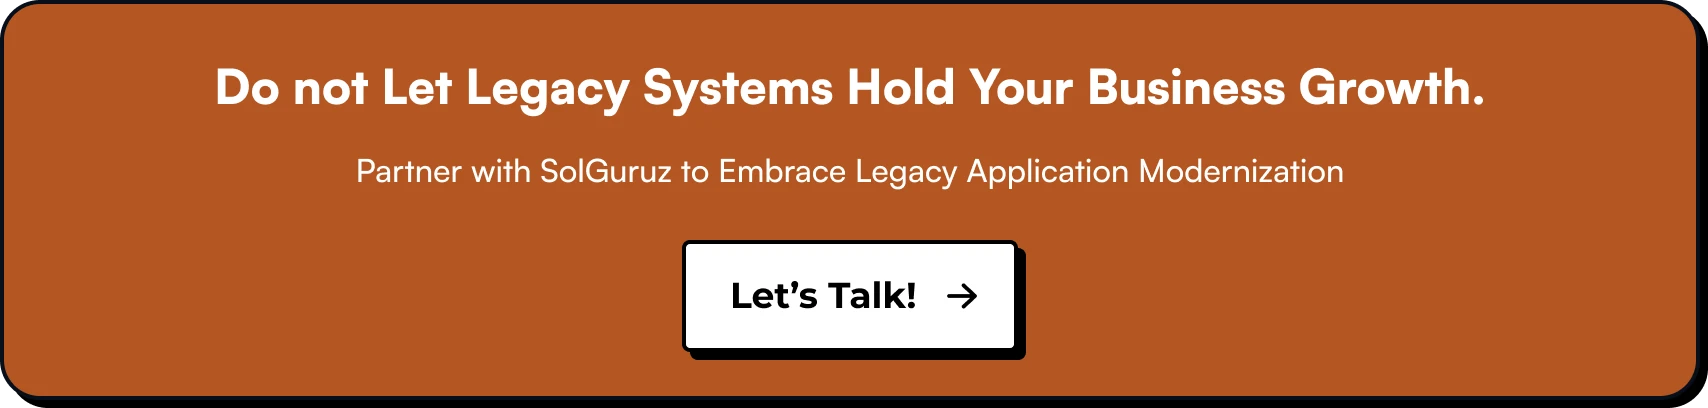 Do not Let Legacy Systems Hold Your Business Growth